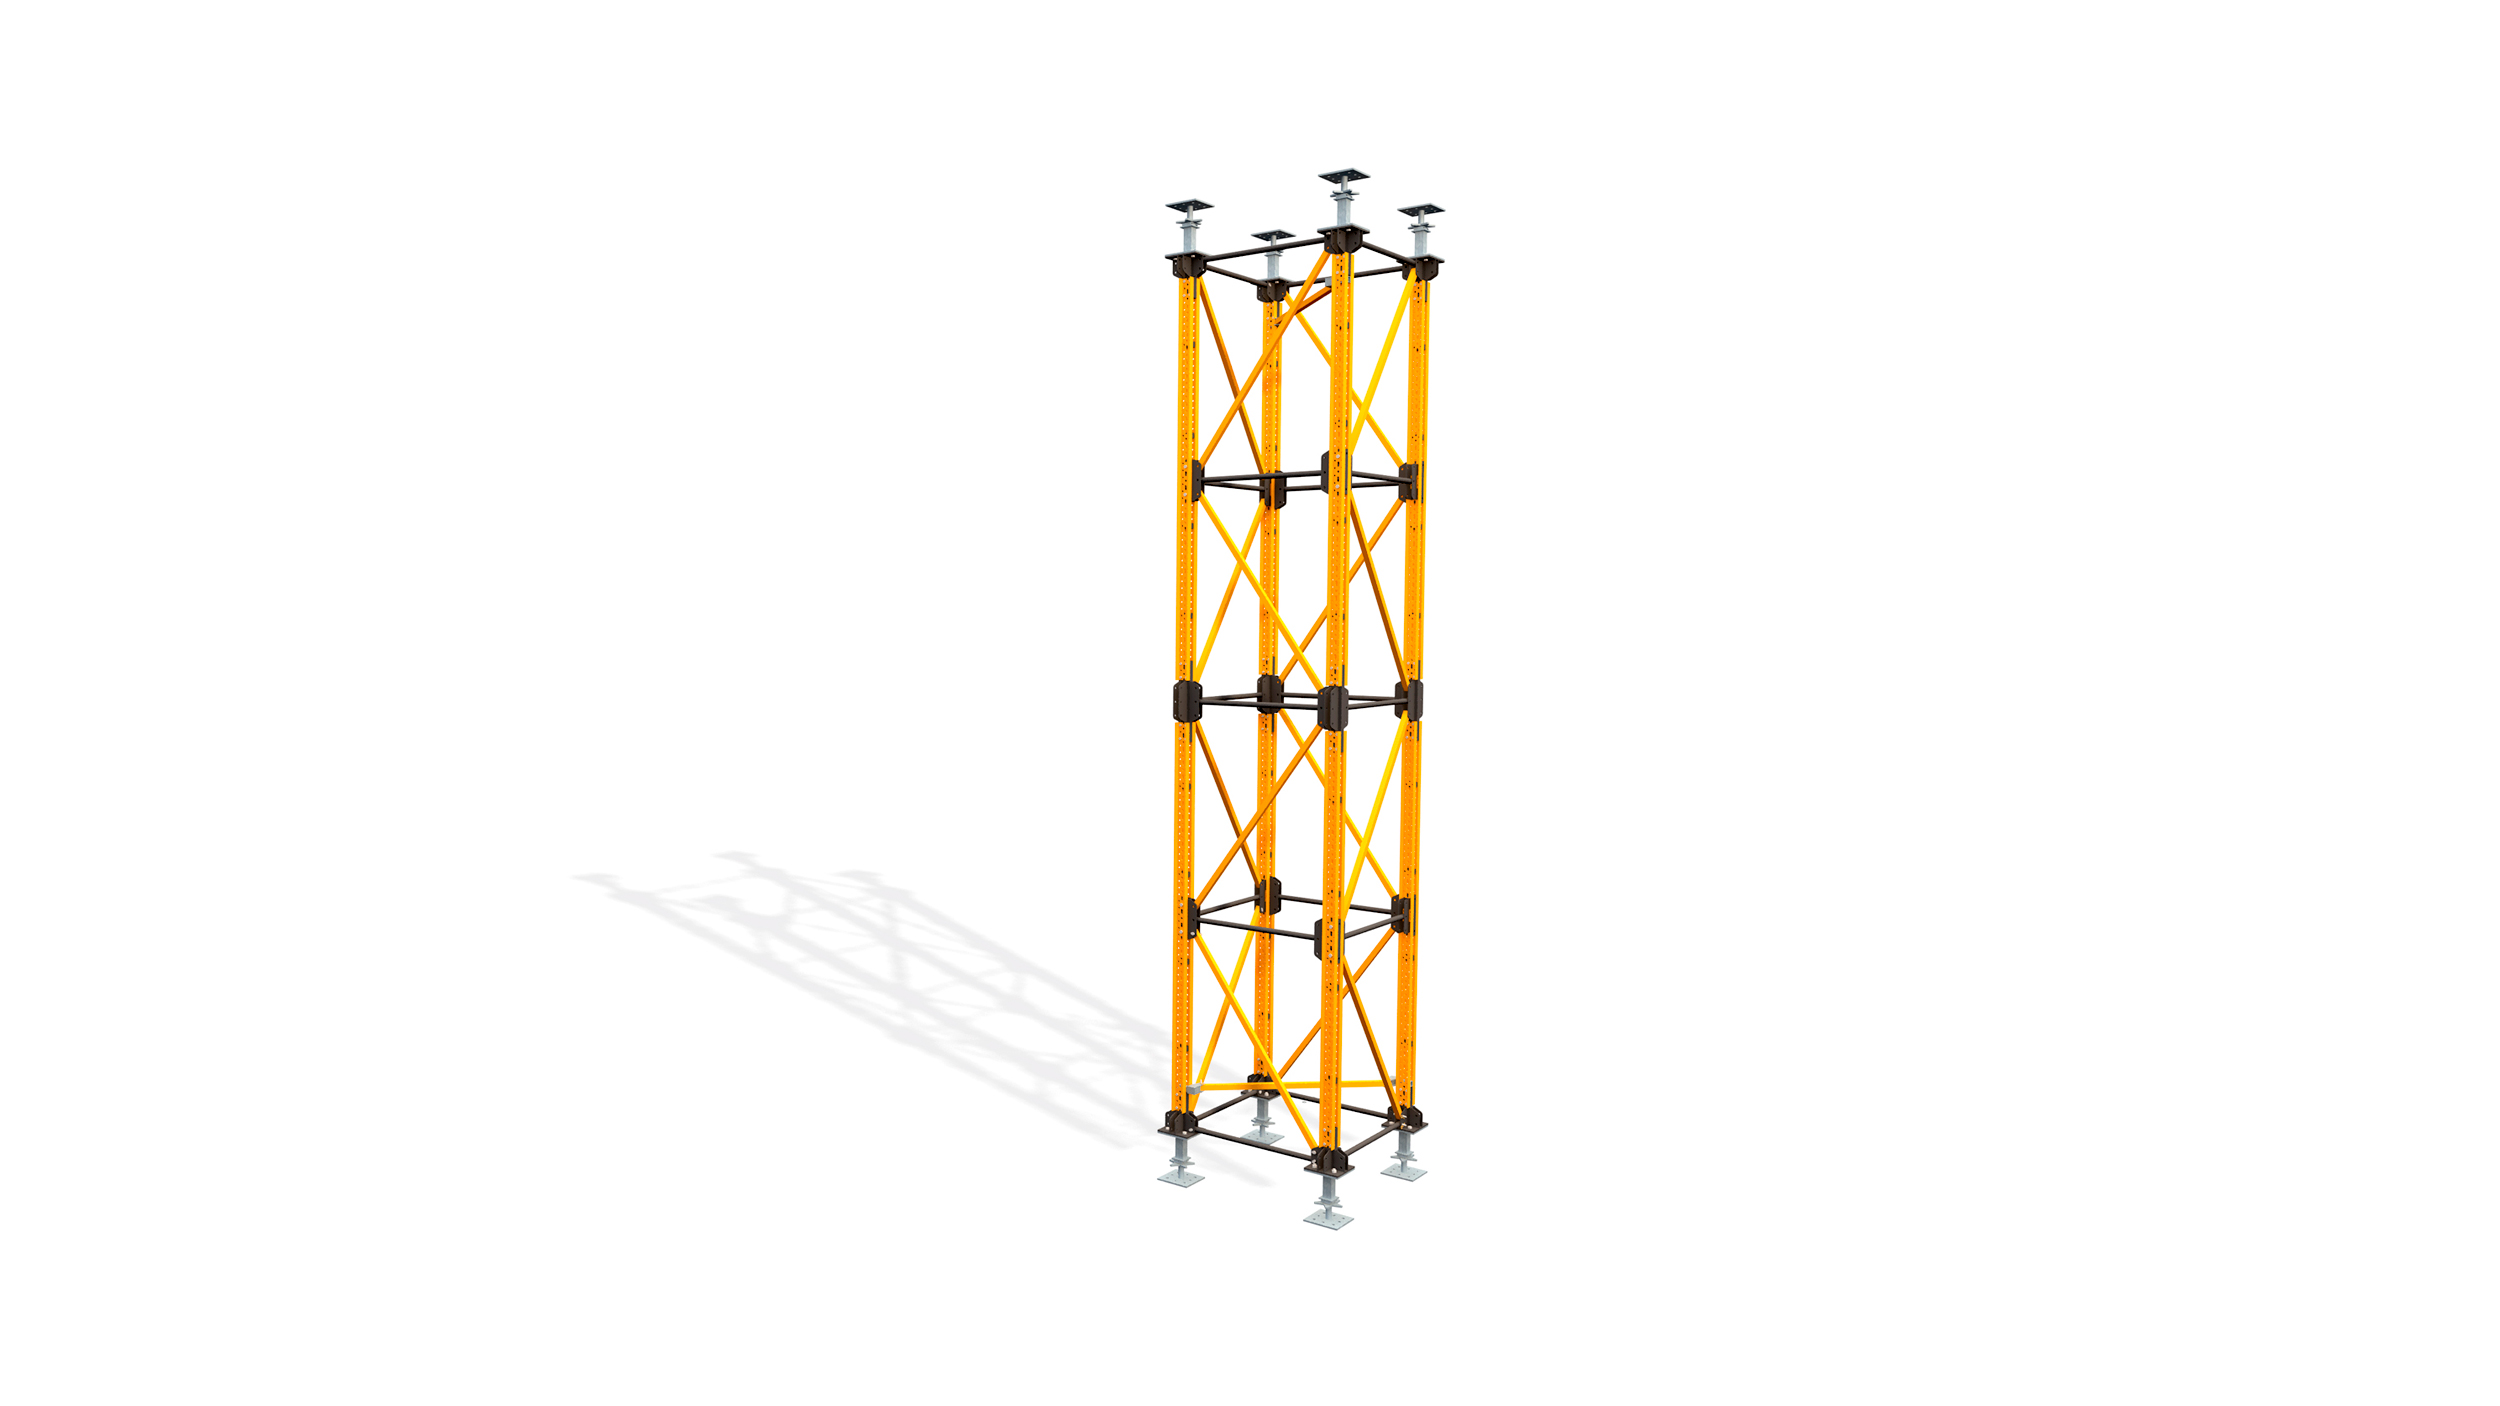 The ultimate heavy duty shoring tower for civil engineering constructions. Highlights: few components for multiple shoring configurations, quick and safe on-site erection.